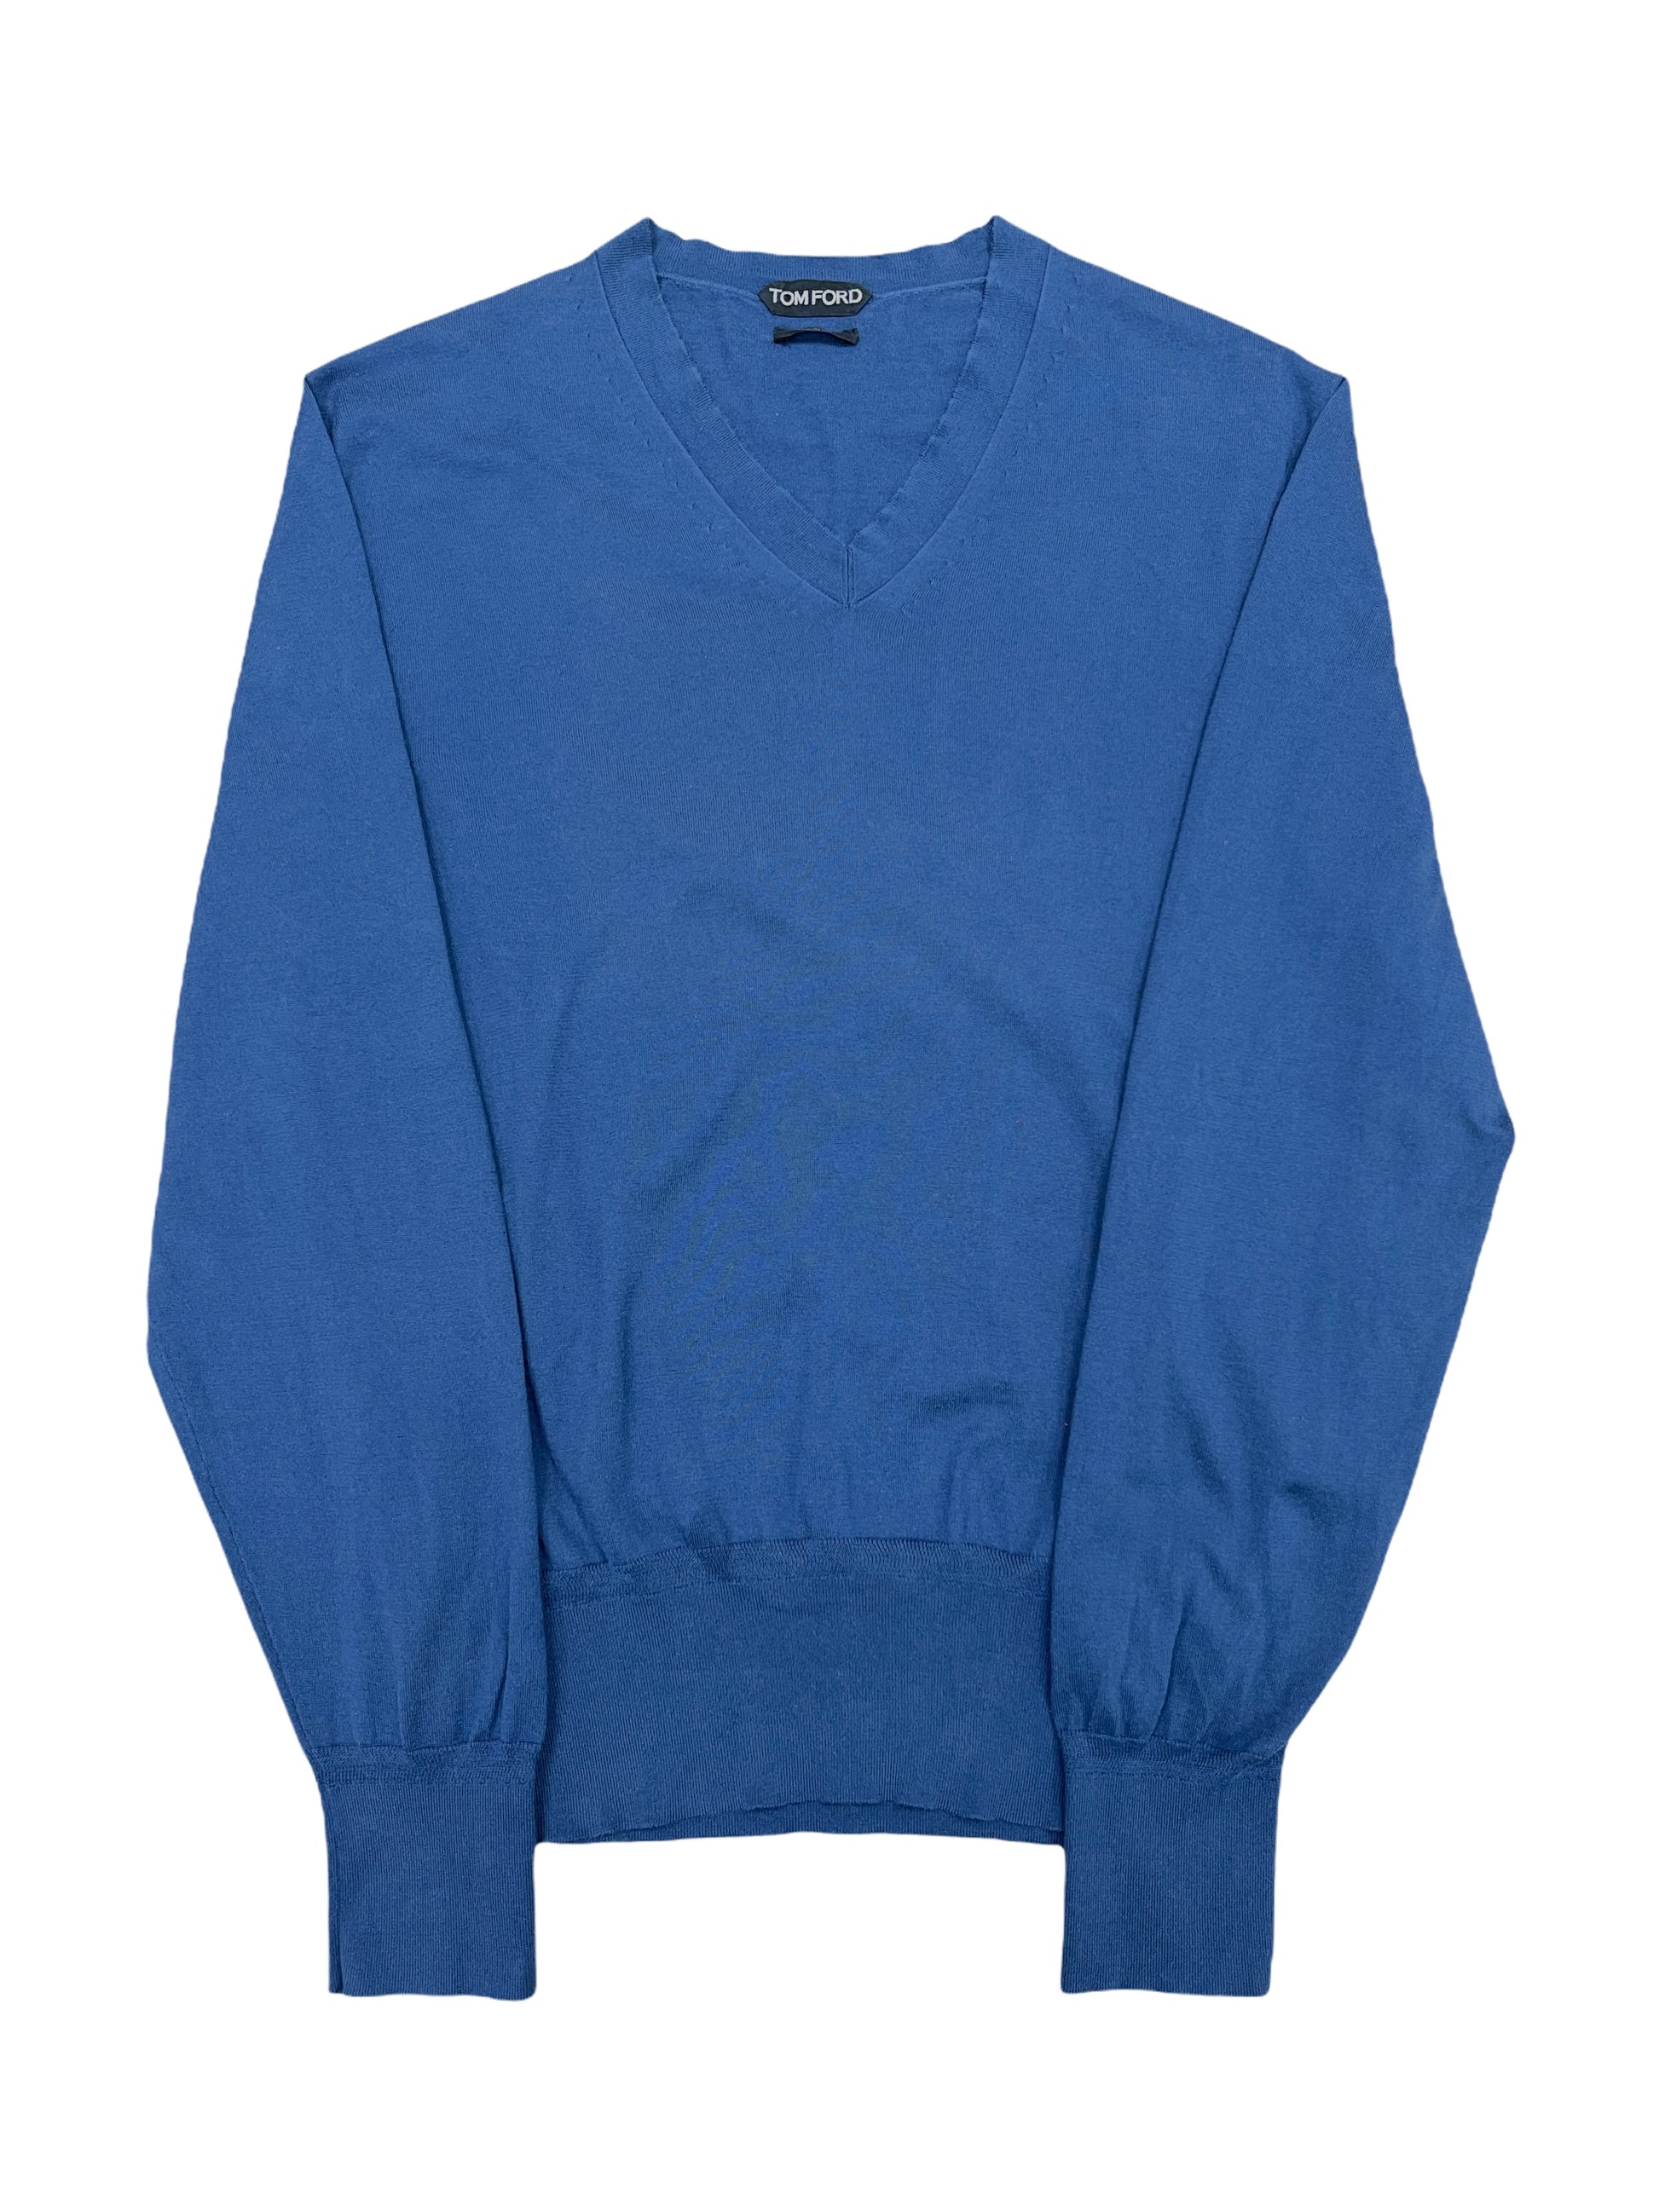 TOM FORD Steel Blue V-Neck Cotton Sweater 40R Medium — Genuine Design luxury consignment Calgary Alberta, Canada New and pre-owned clothing, shoes, accessories